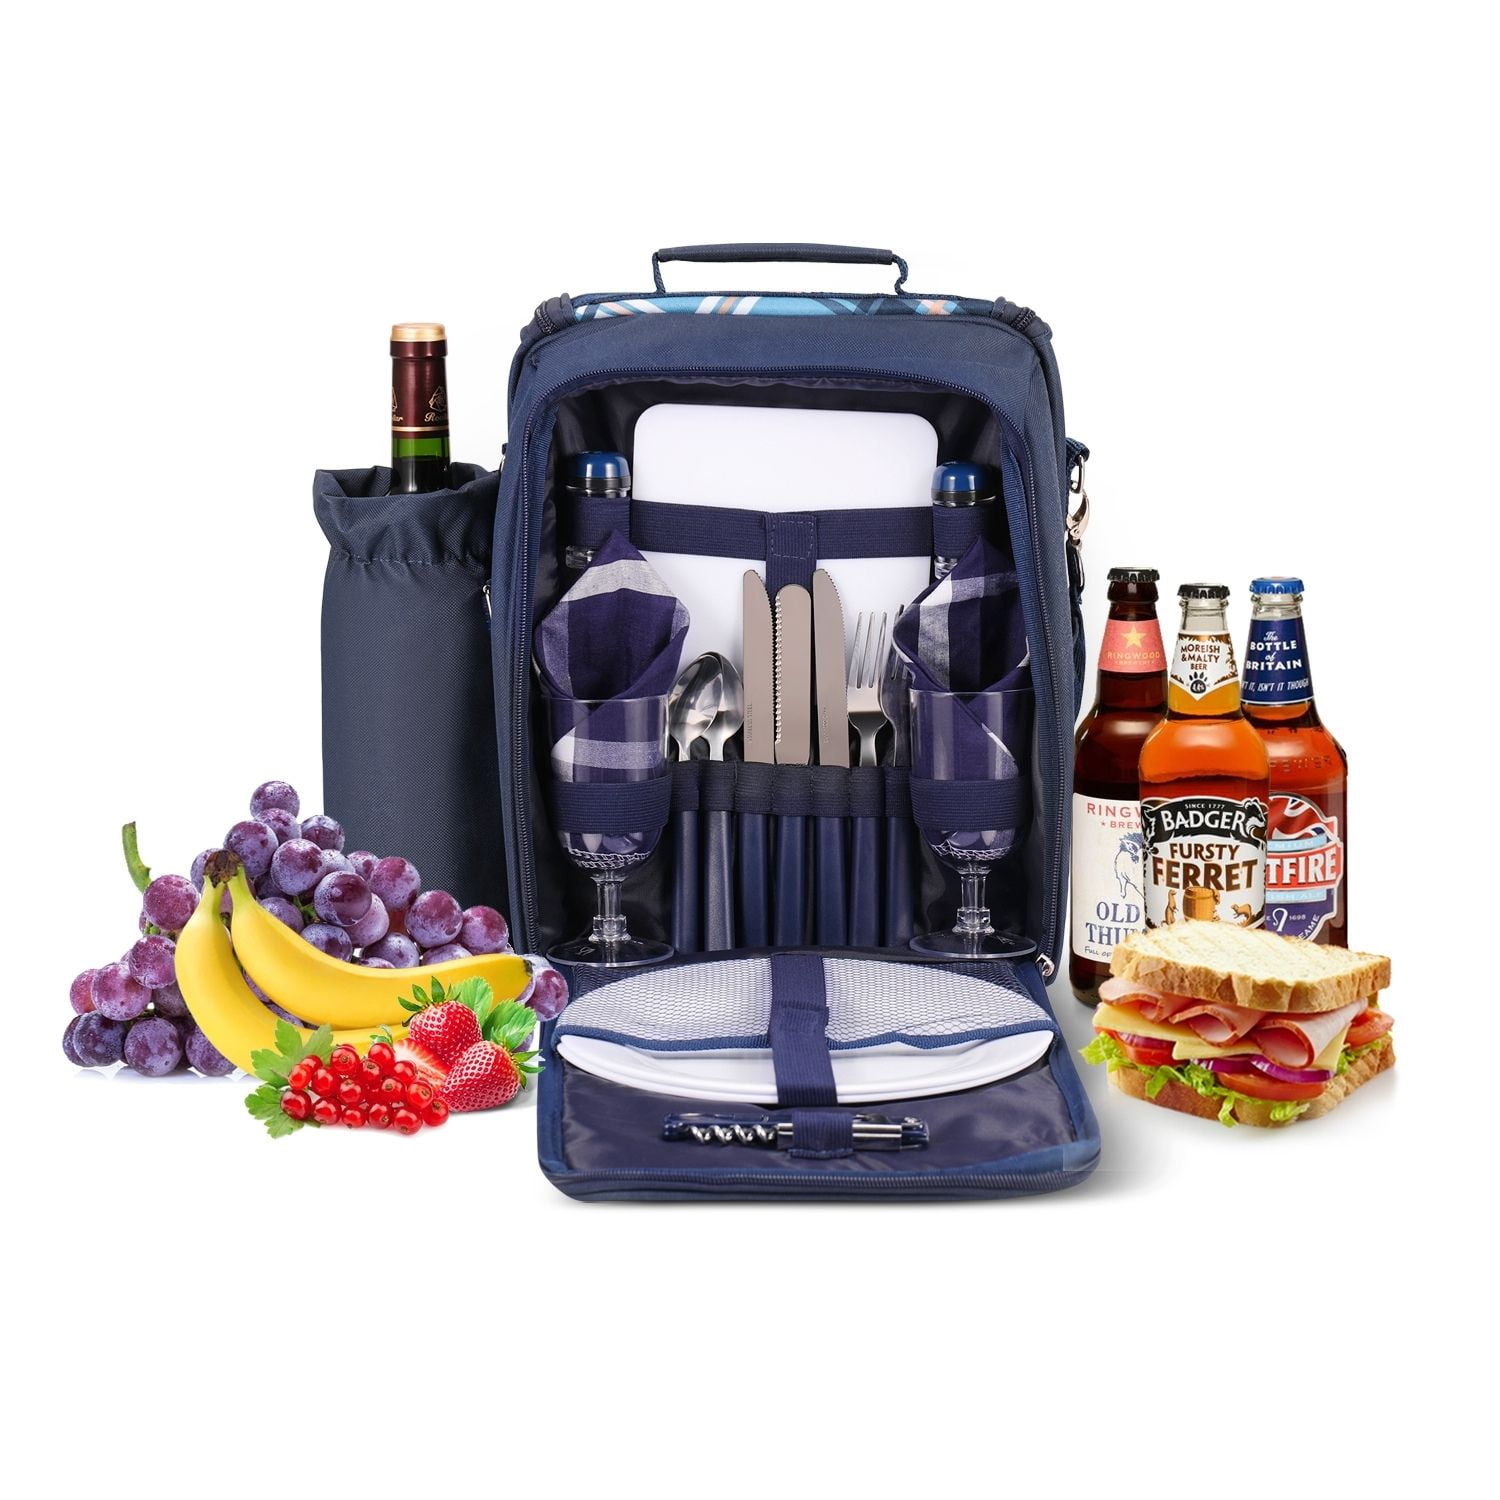  Apollo Walker Picnic Backpack Set for 2 Person with Cooler  Compartment, Detachable Bottle/Wine Holder, Fleece Blanket, Plates and  Cutlery Set (Teal) : Patio, Lawn & Garden